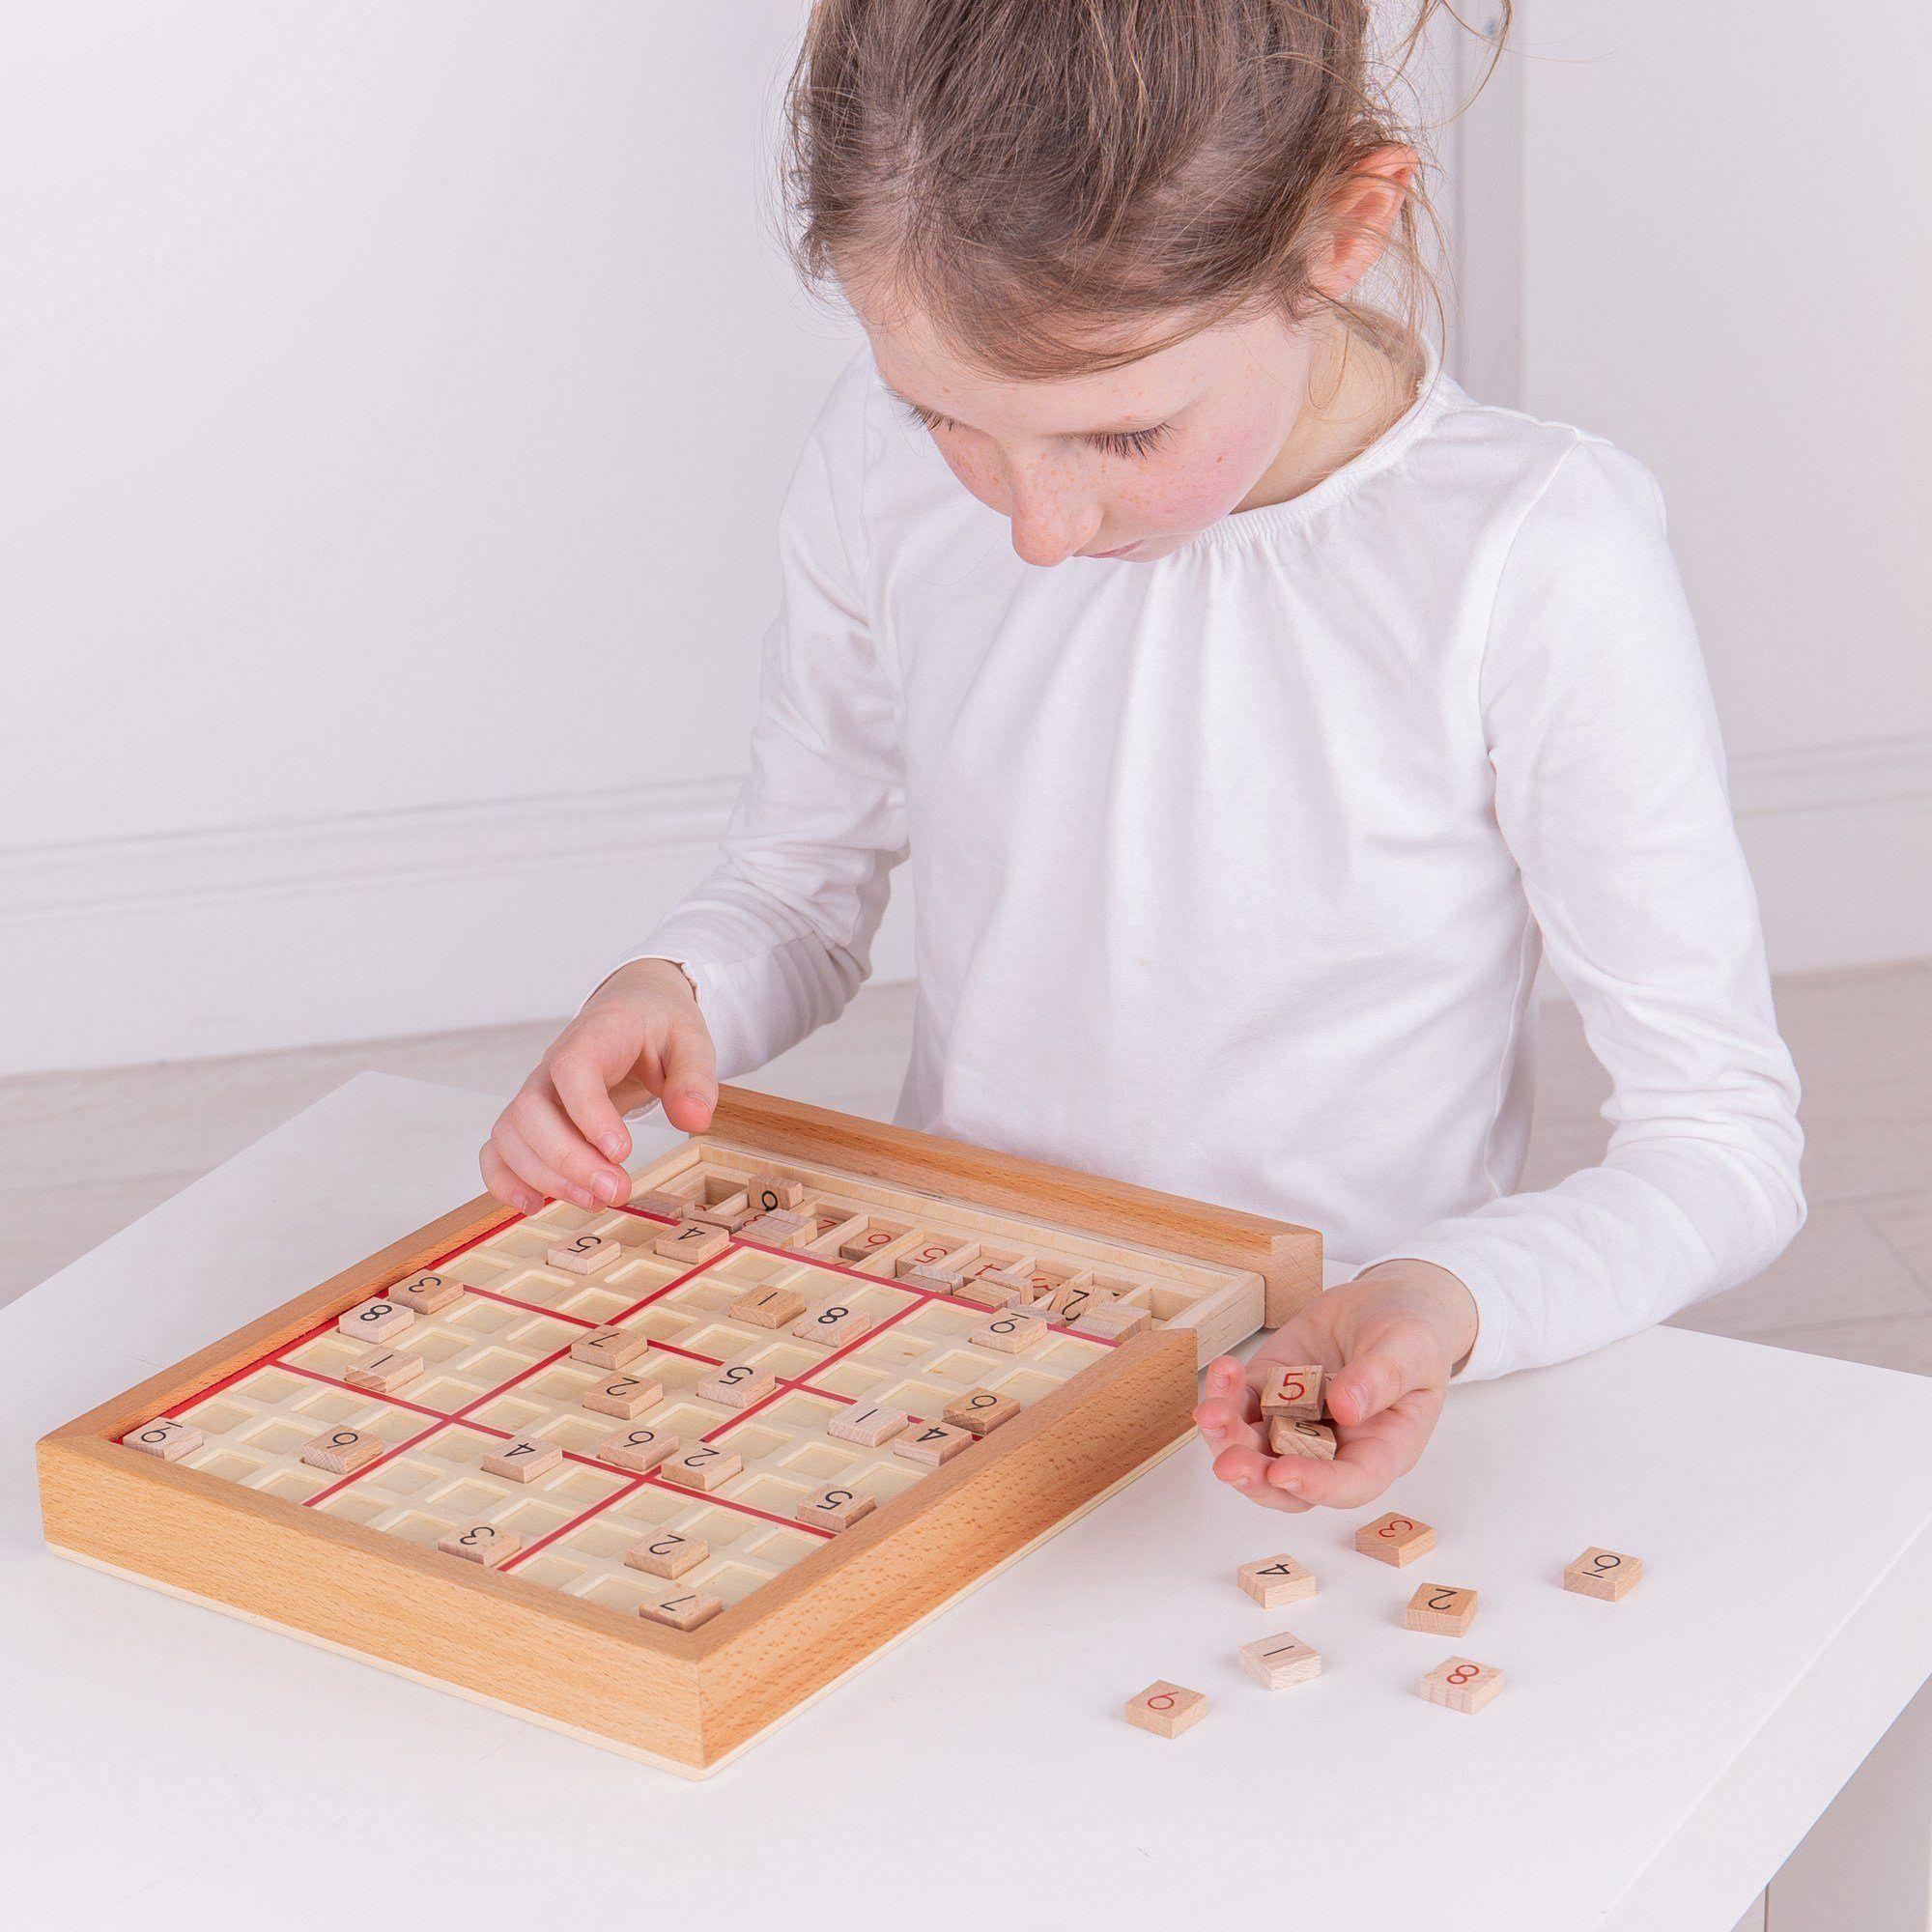 Girl in a white top playing the wooden sudoku game.